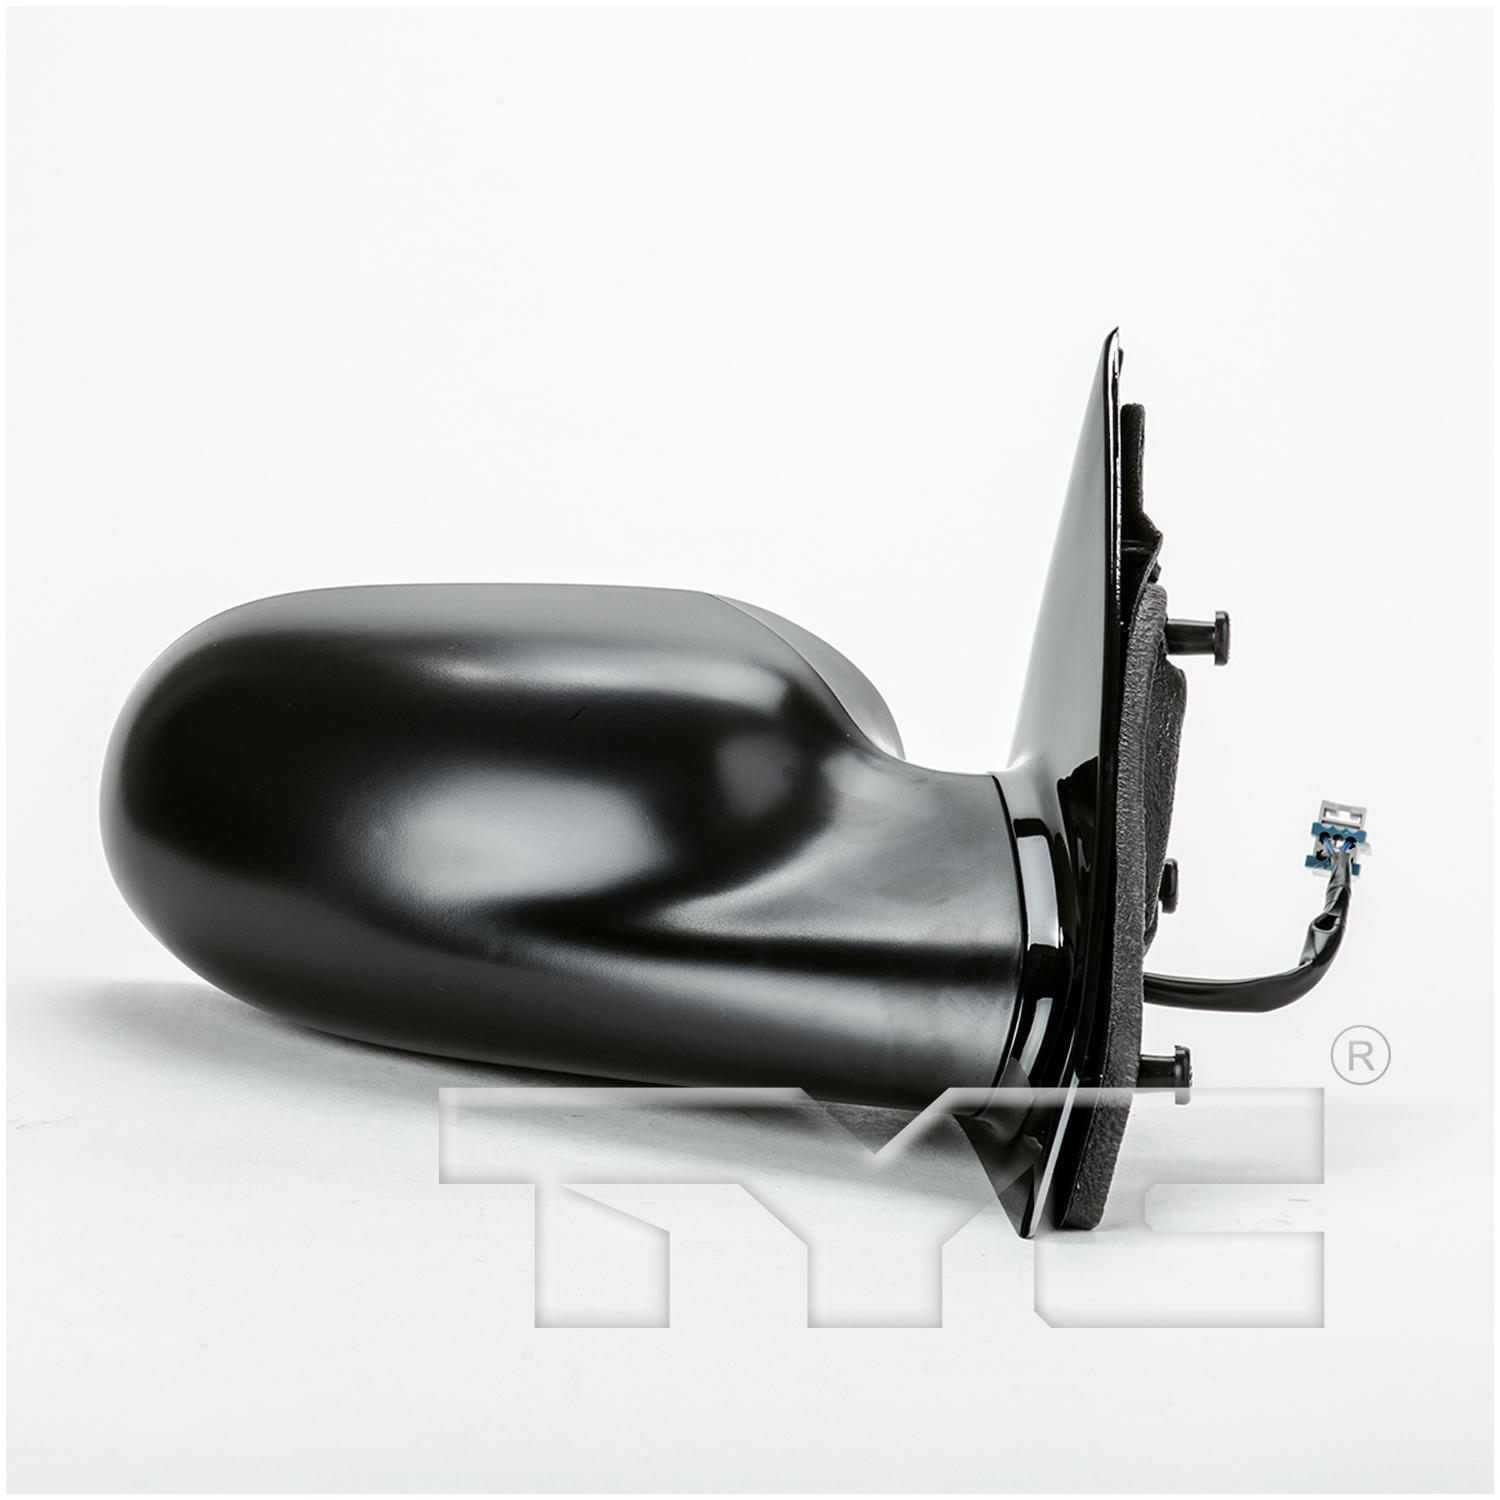 Aftermarket MIRRORS for SATURN - L200, L200,01-03,RT Mirror outside rear view